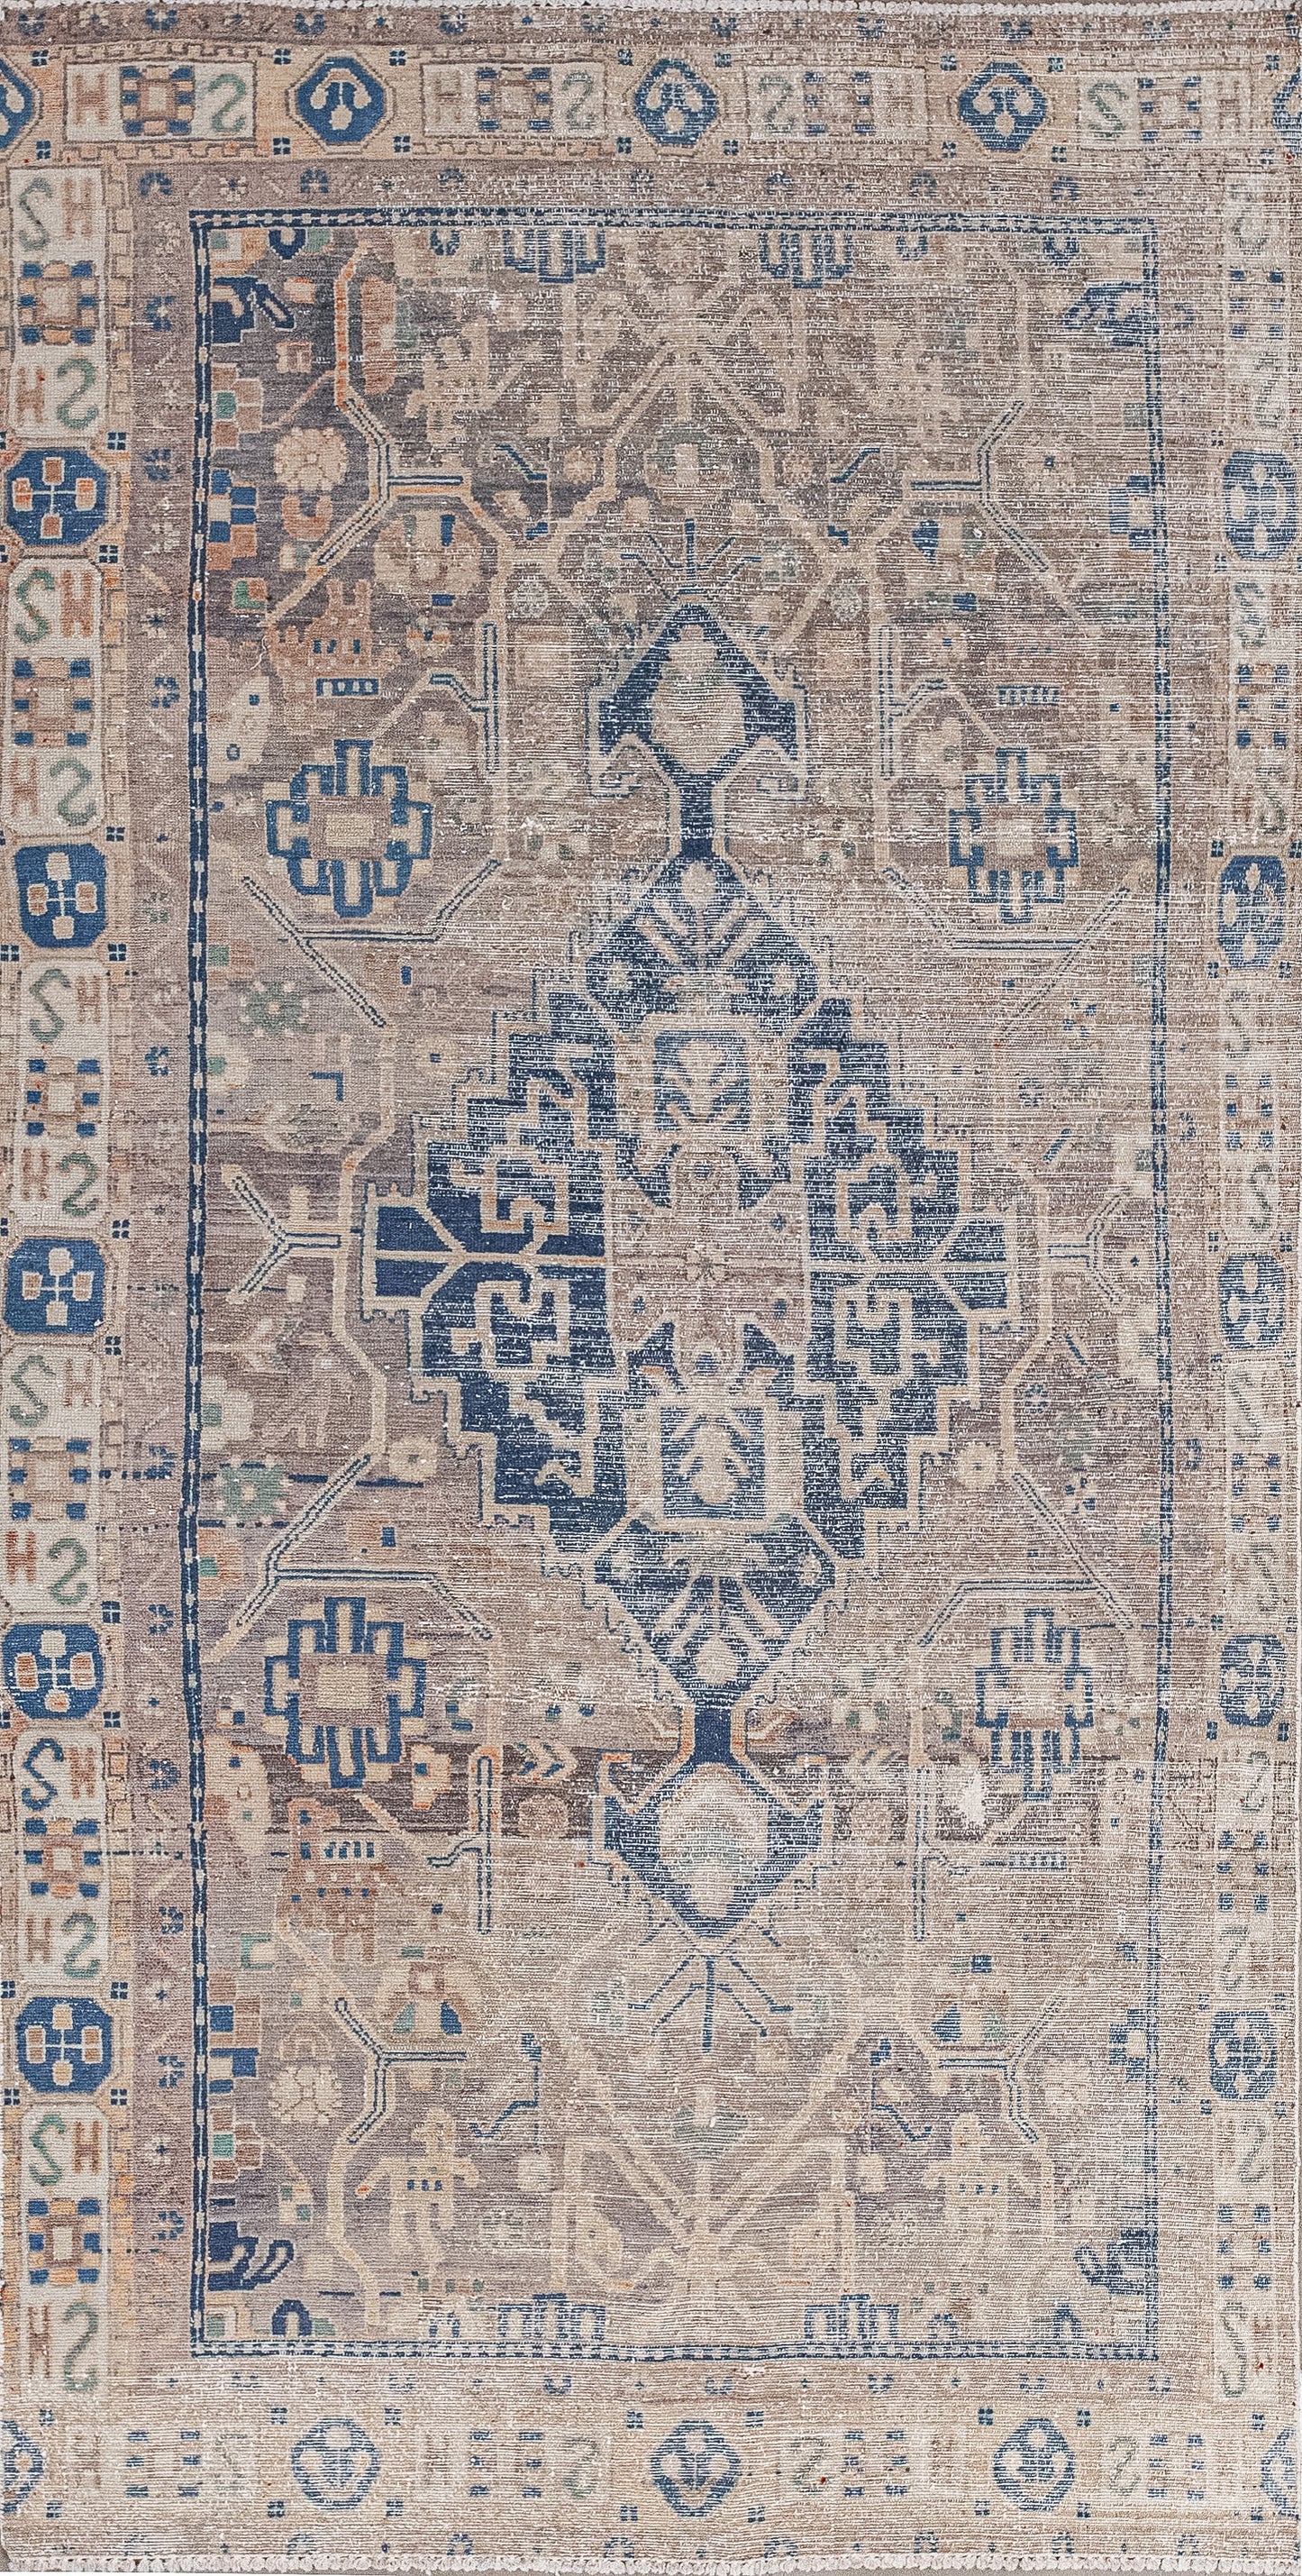 This quirky rug comes with a ton of symbols that are open to representation. The woven colors are variations of brown for the background and royal blue for the pattern.